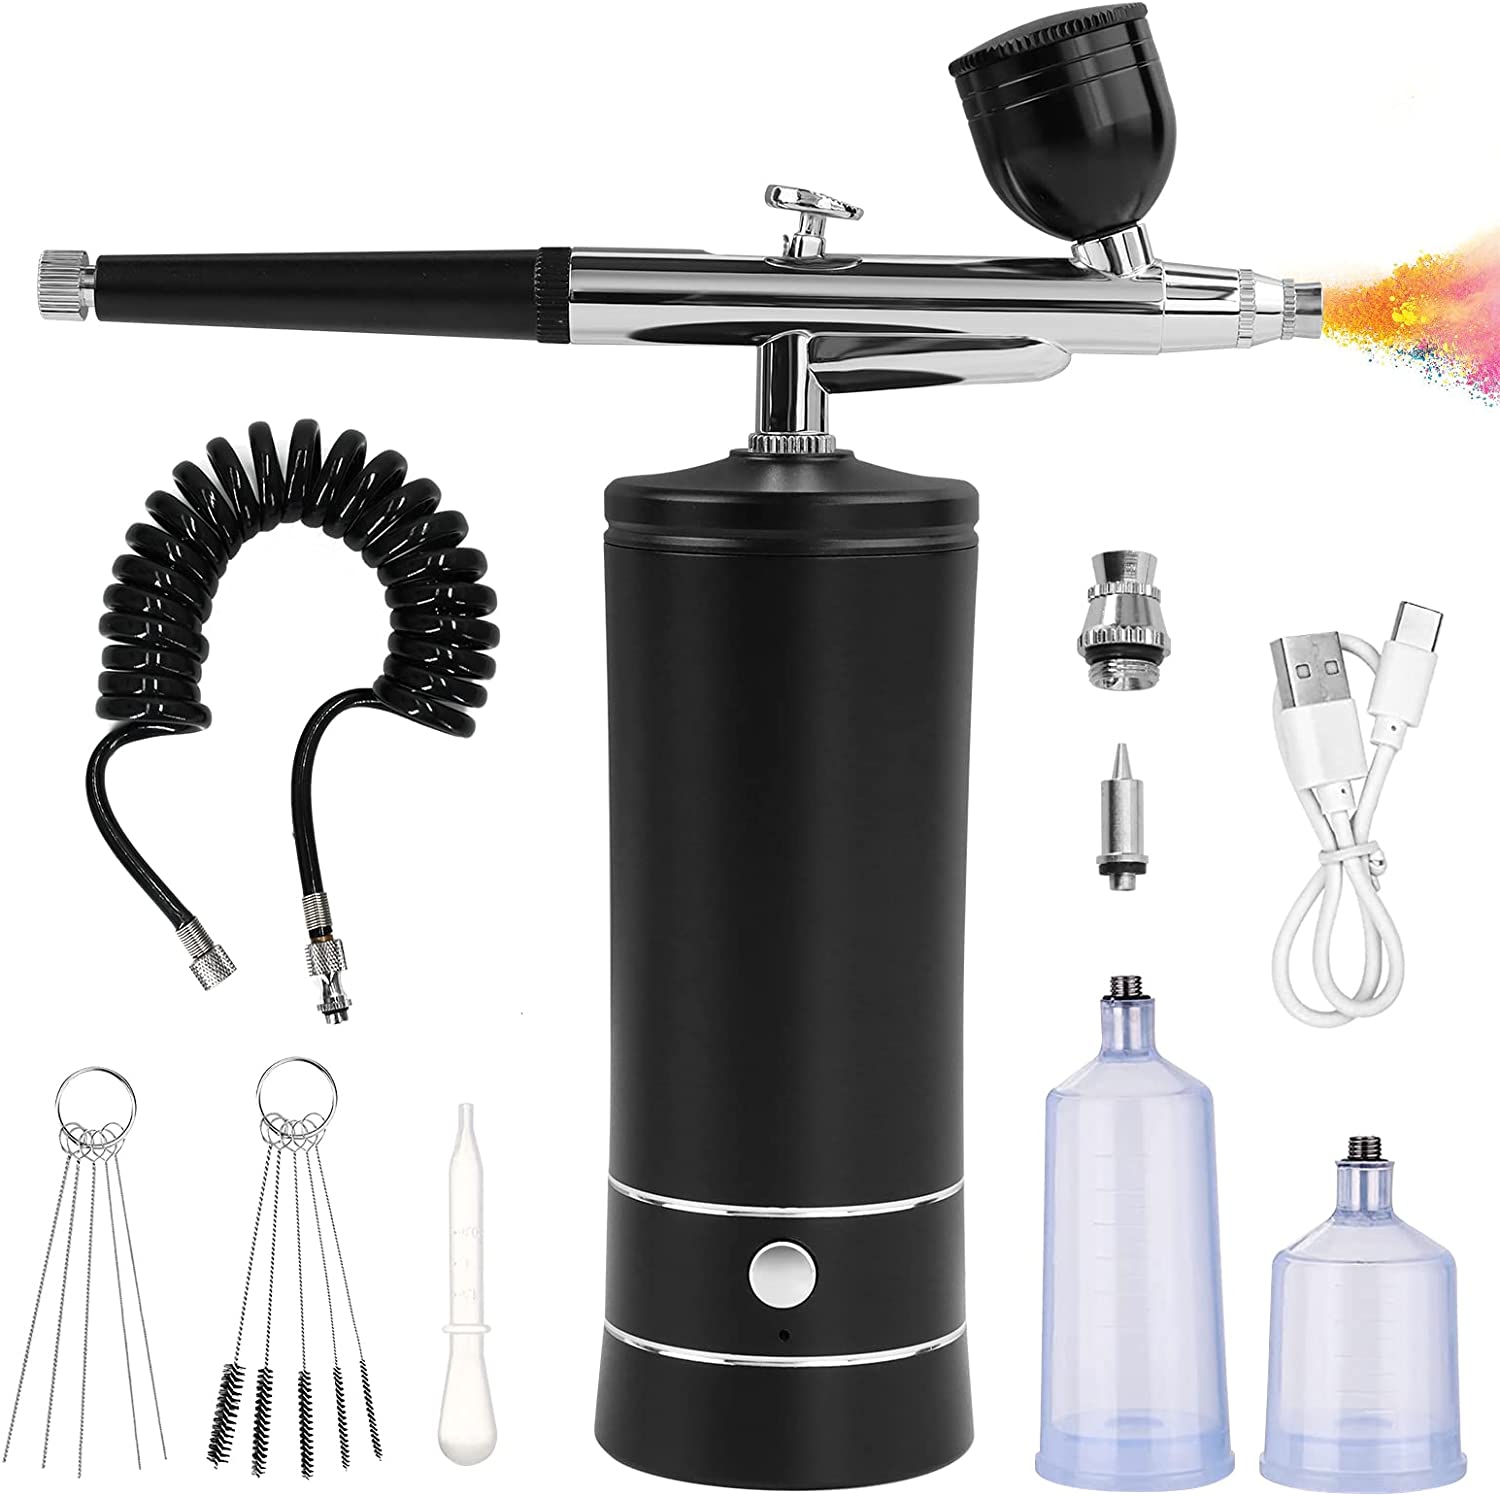  Saudoli 46 PSI Airbrush Kit With Compressor - Double